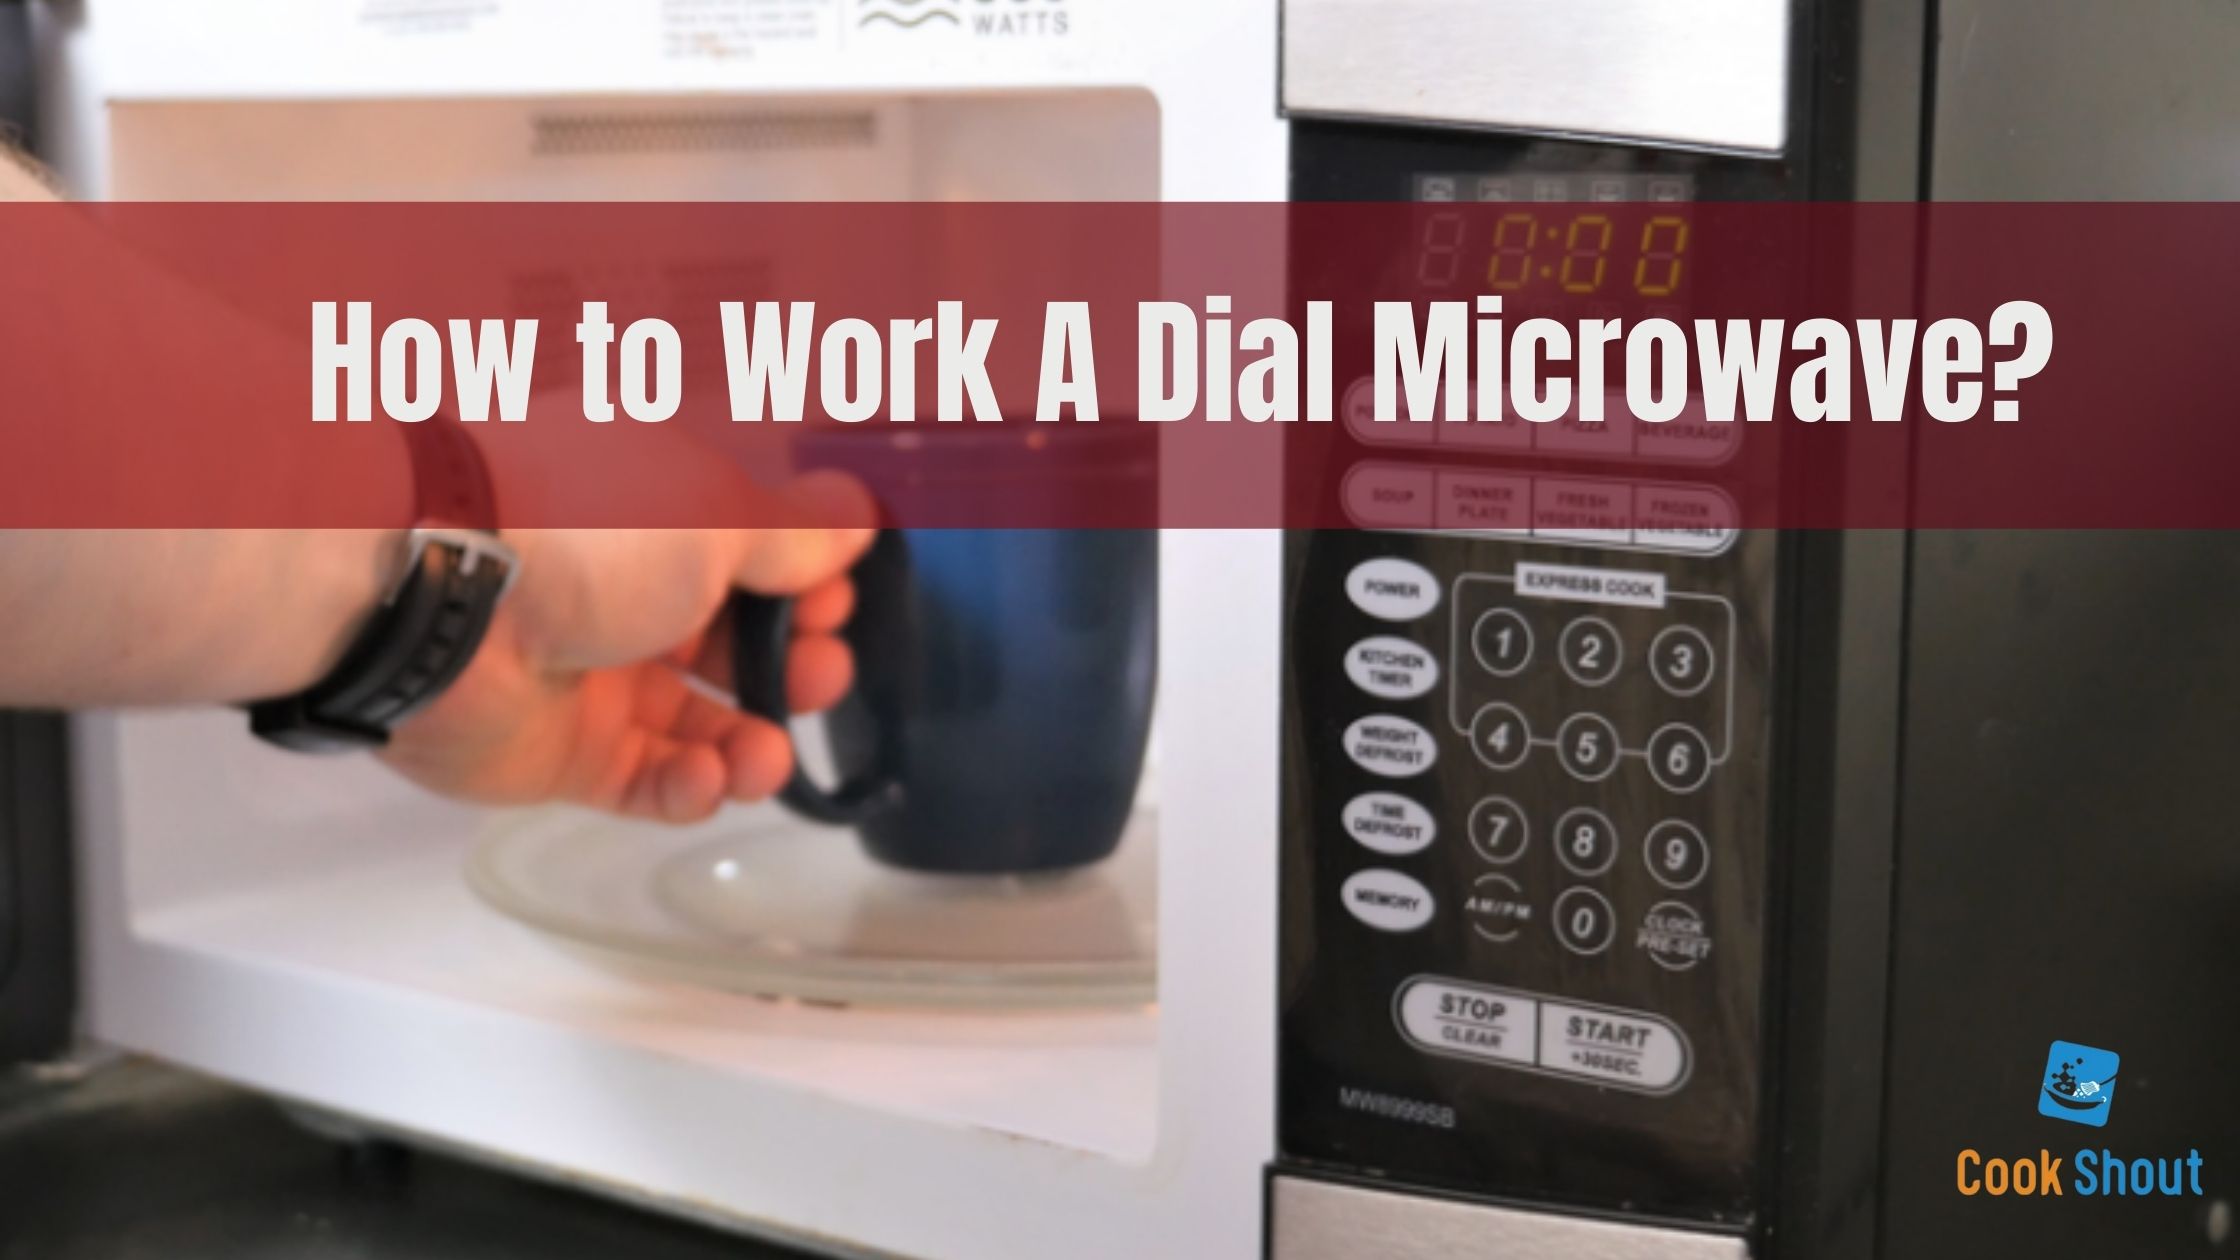 How to Work A Dial Microwave